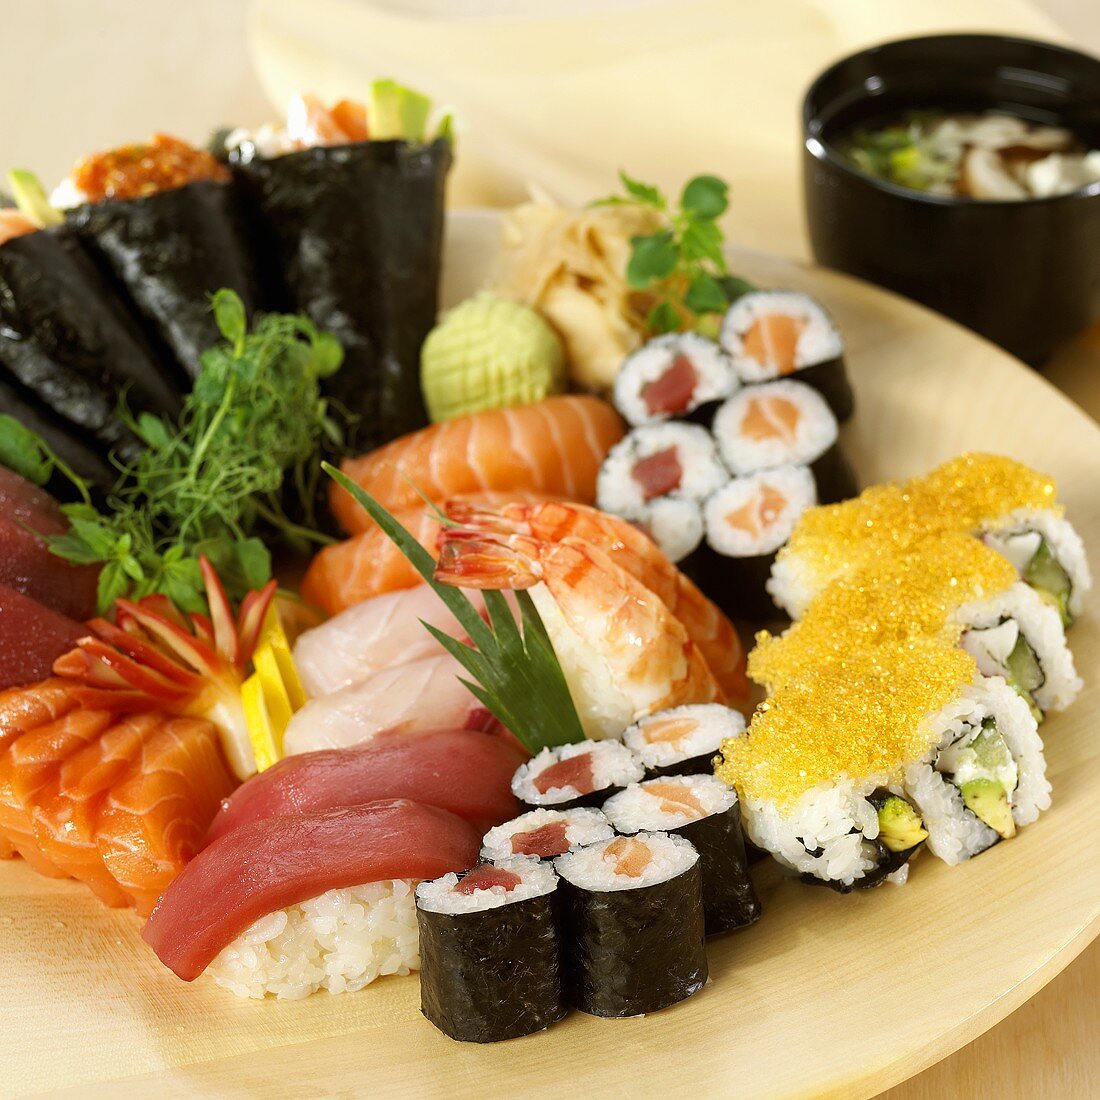 A selection of sushi on a plate